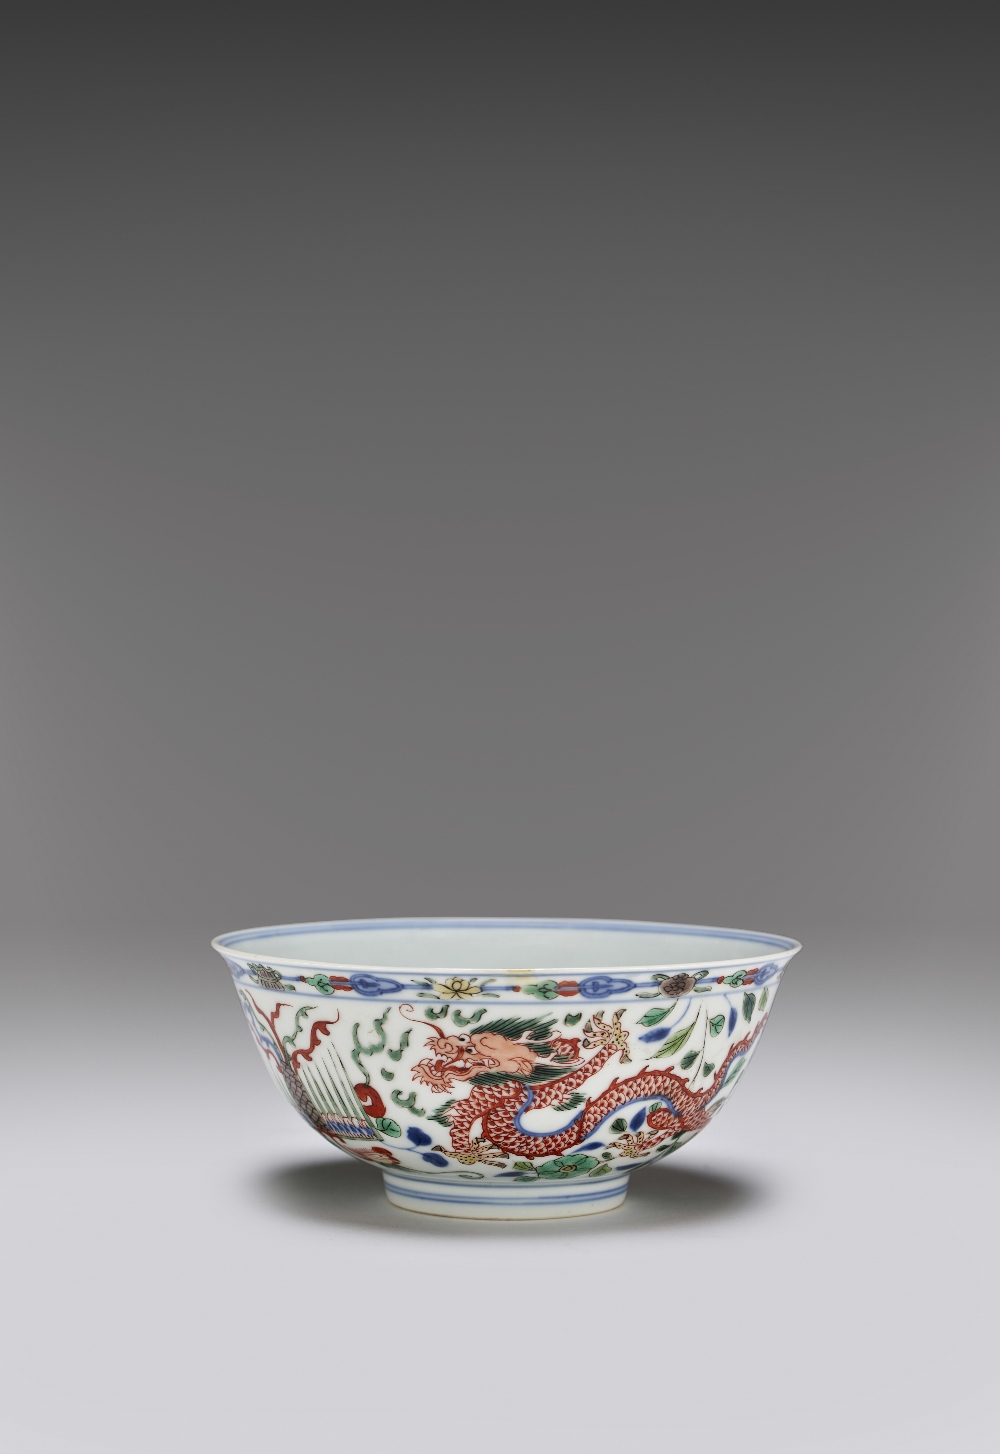 A RARE CHINESE IMPERIAL WUCAI 'DRAGON AND PHOENIX' BOWL SIX CHARACTER YONGZHENG MARK AND OF THE